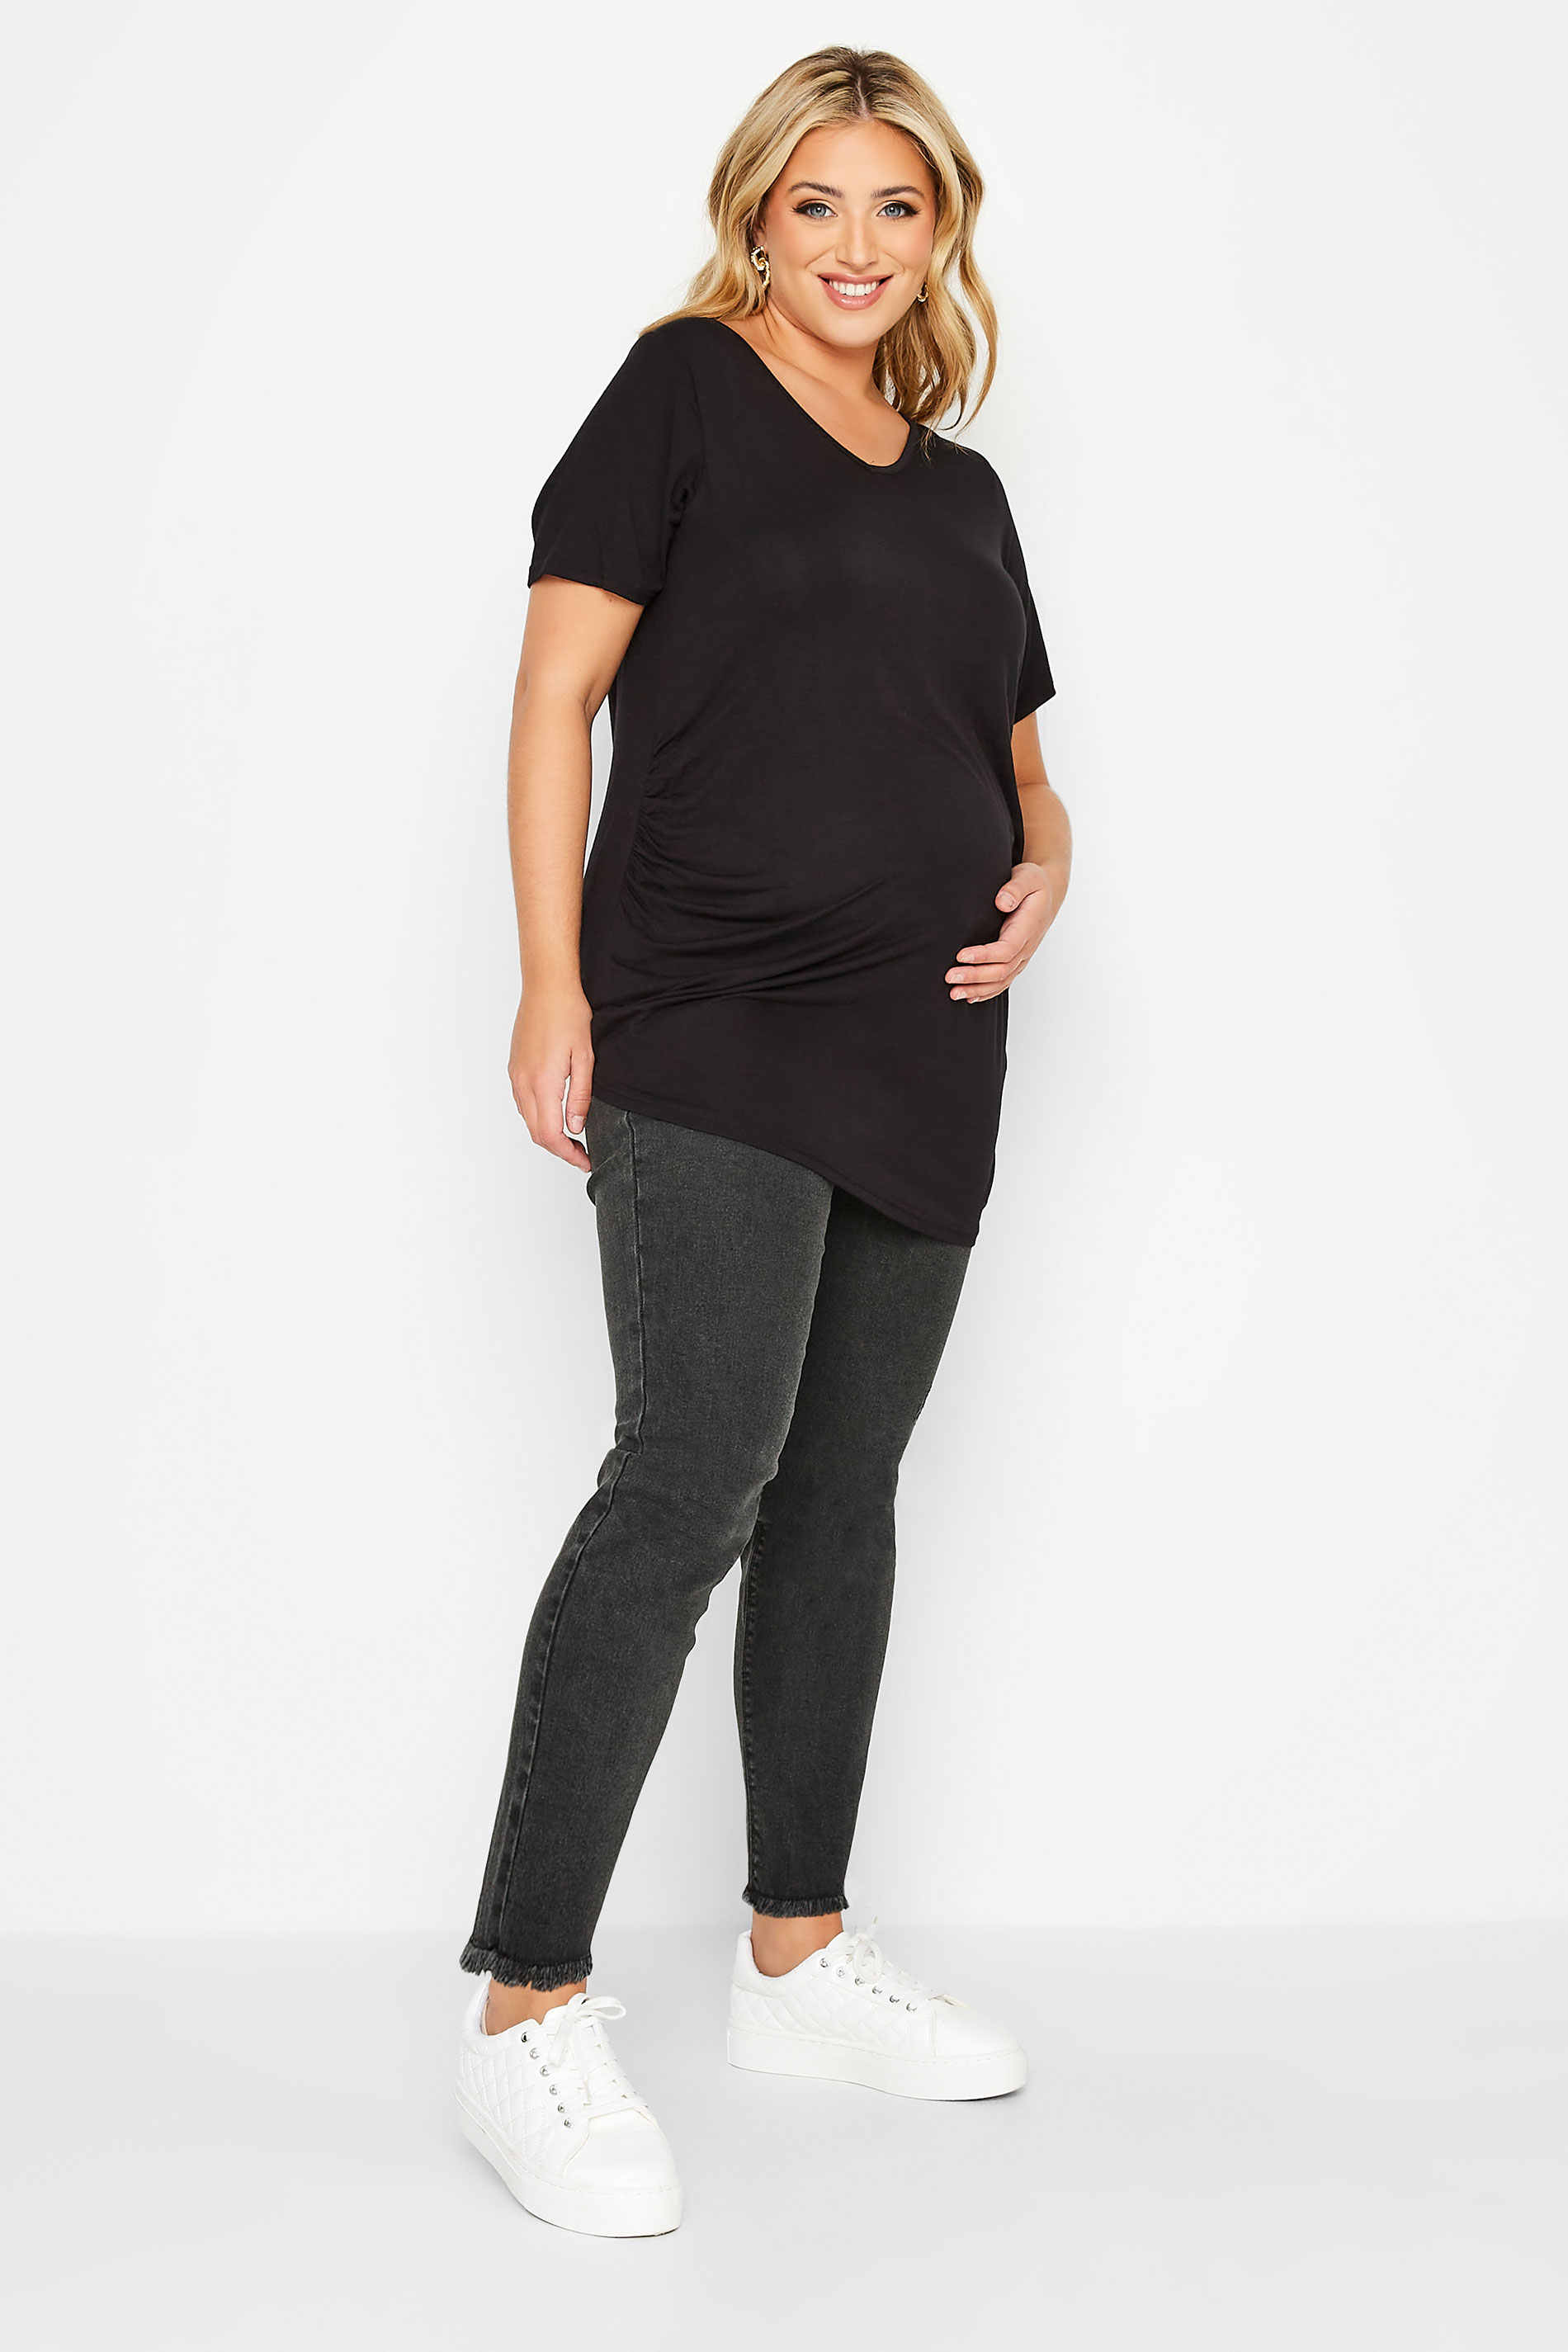 BUMP IT UP MATERNITY Plus Size Washed Black Push Up AVA Jeans | Yours Clothing 2